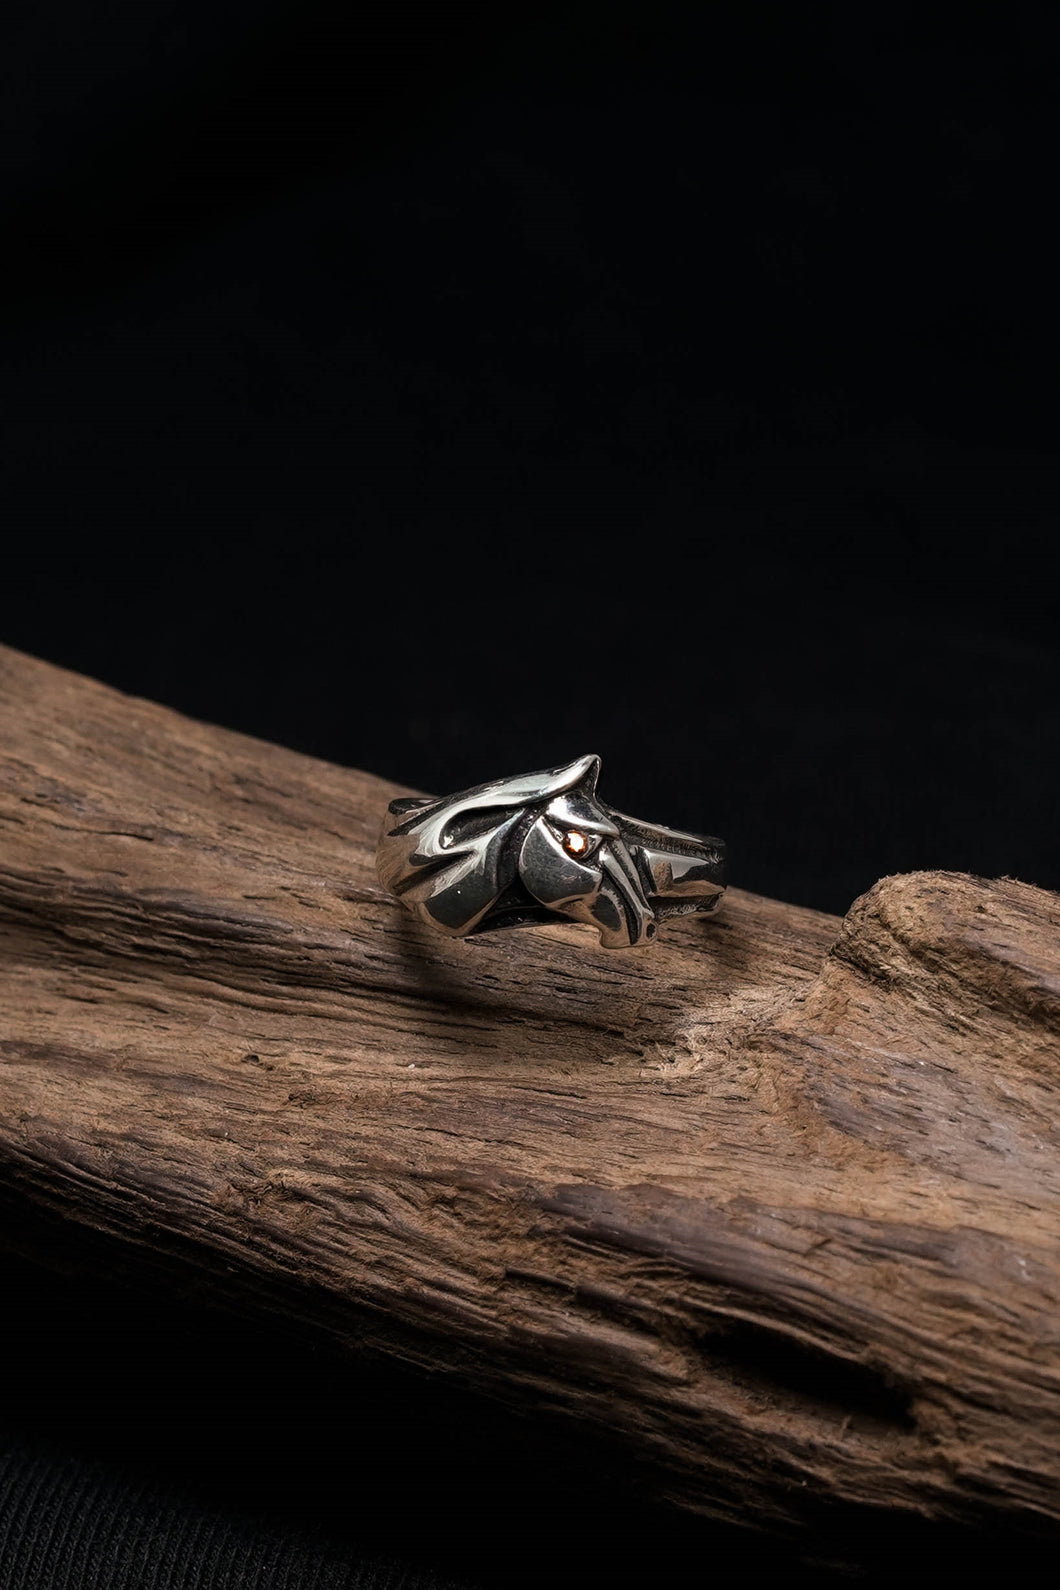 Horse Head Retro 925 Sterling Silver Ring